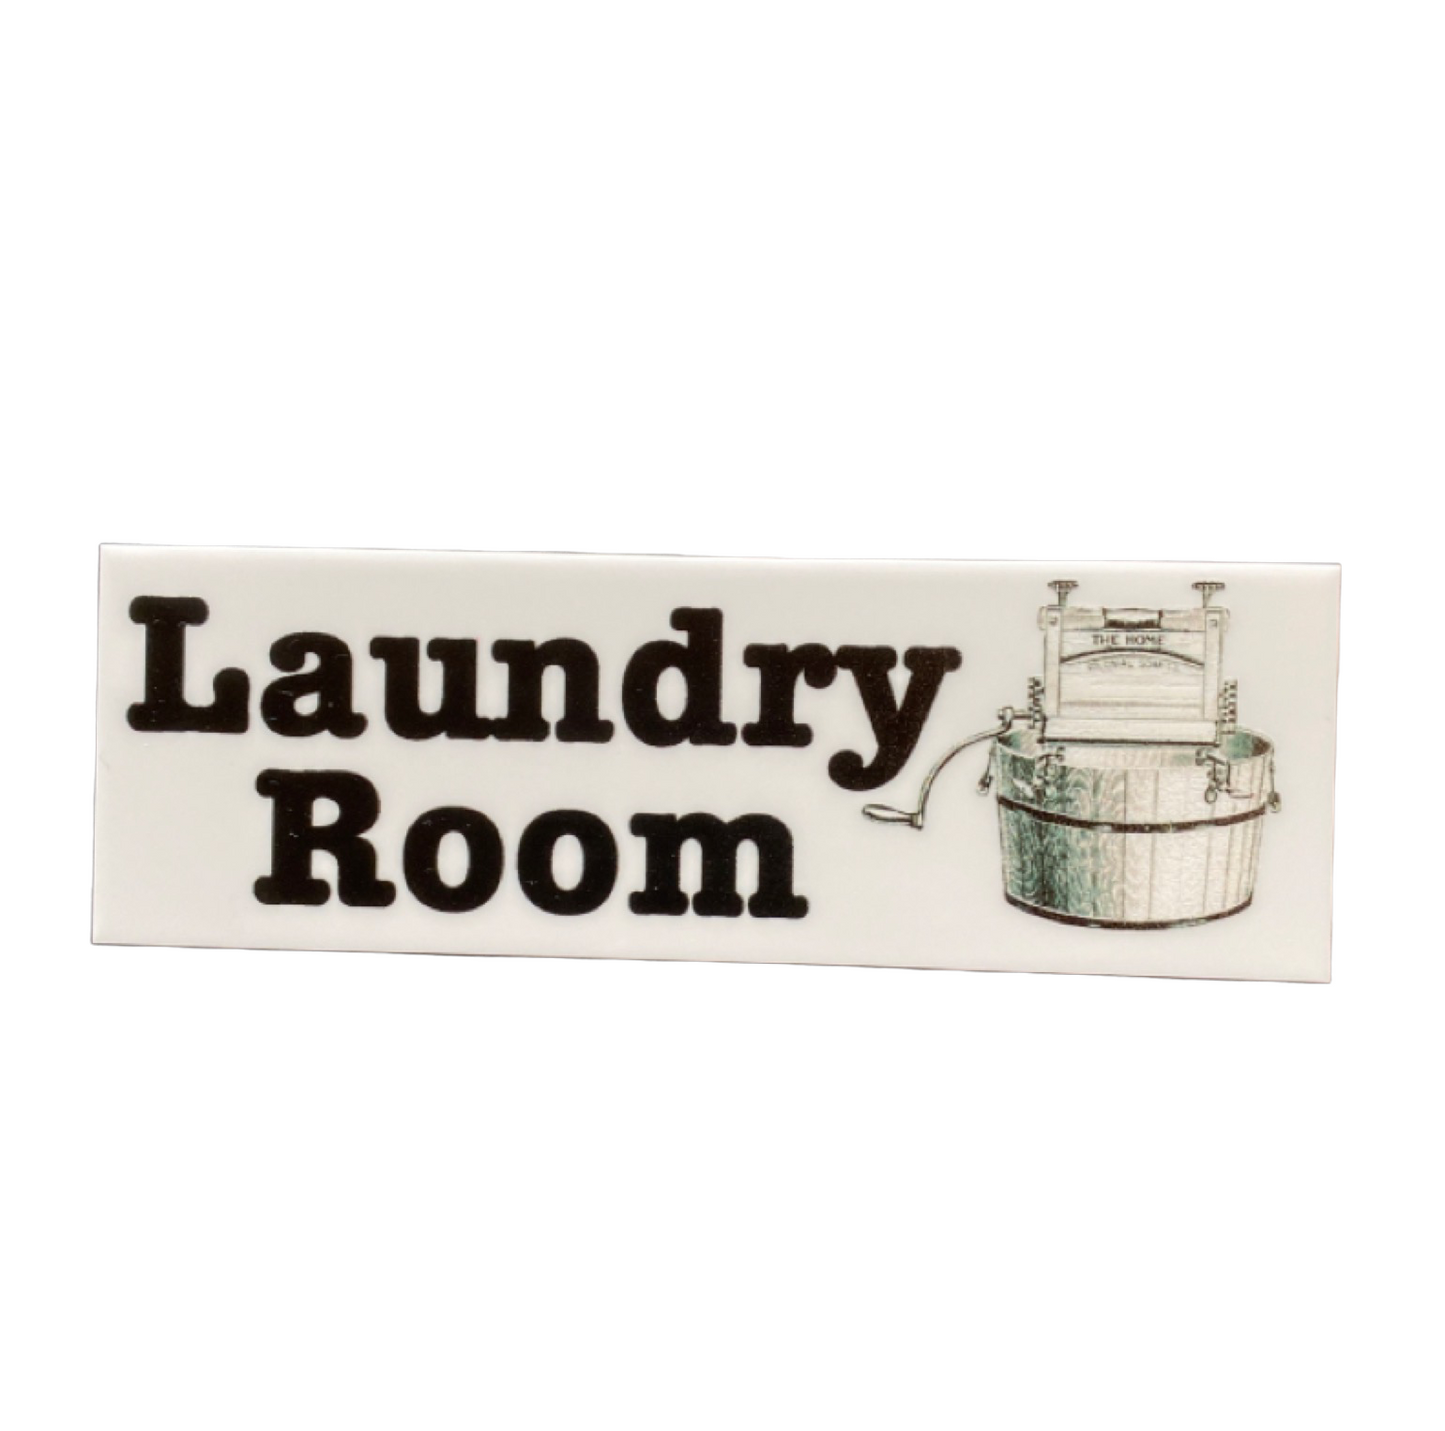 Laundry Room Door Vintage Sign - The Renmy Store Homewares & Gifts 